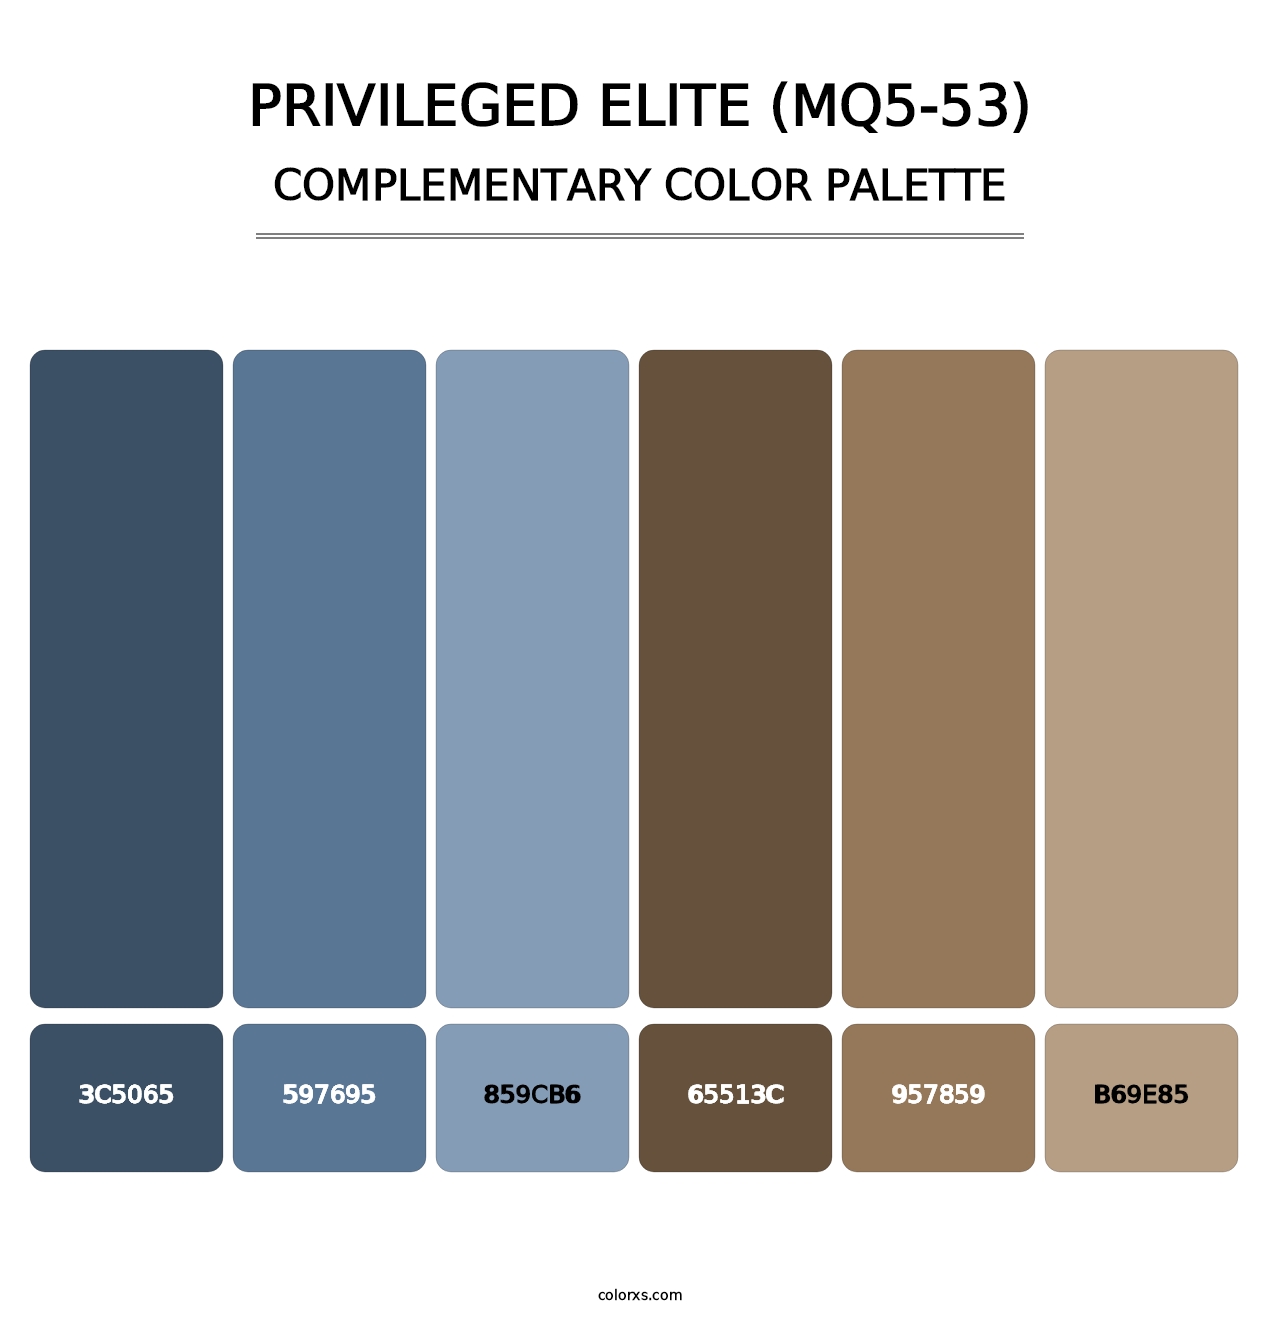 Privileged Elite (MQ5-53) - Complementary Color Palette